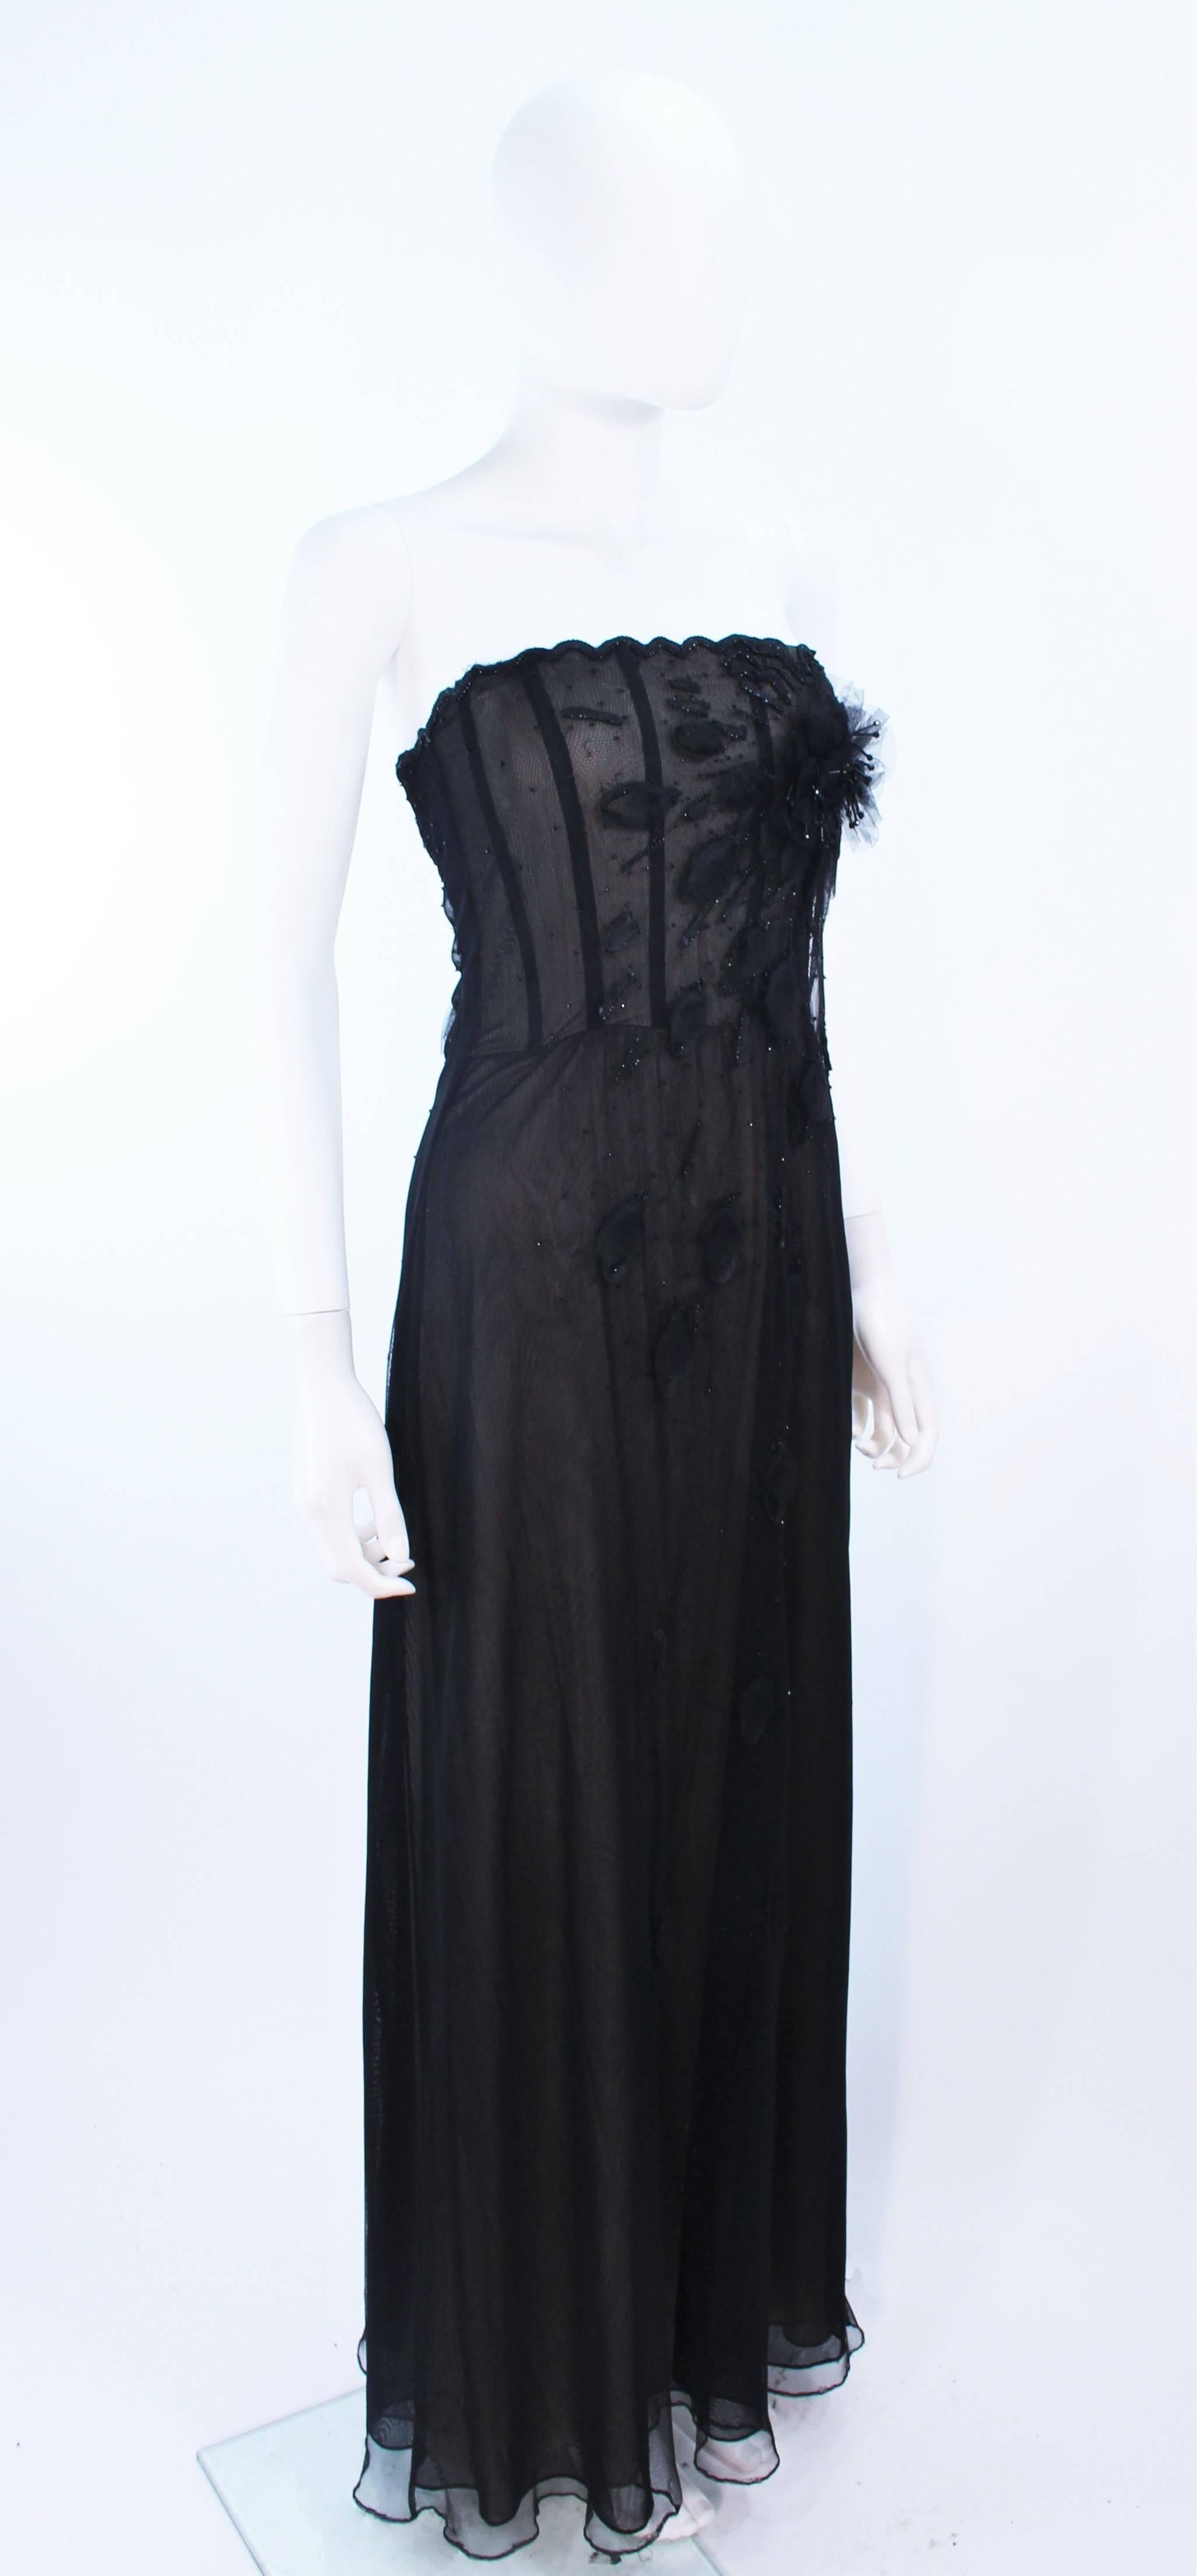 Women's Custom Black Floral Beaded Applique Gown with Nude Size 2 For Sale